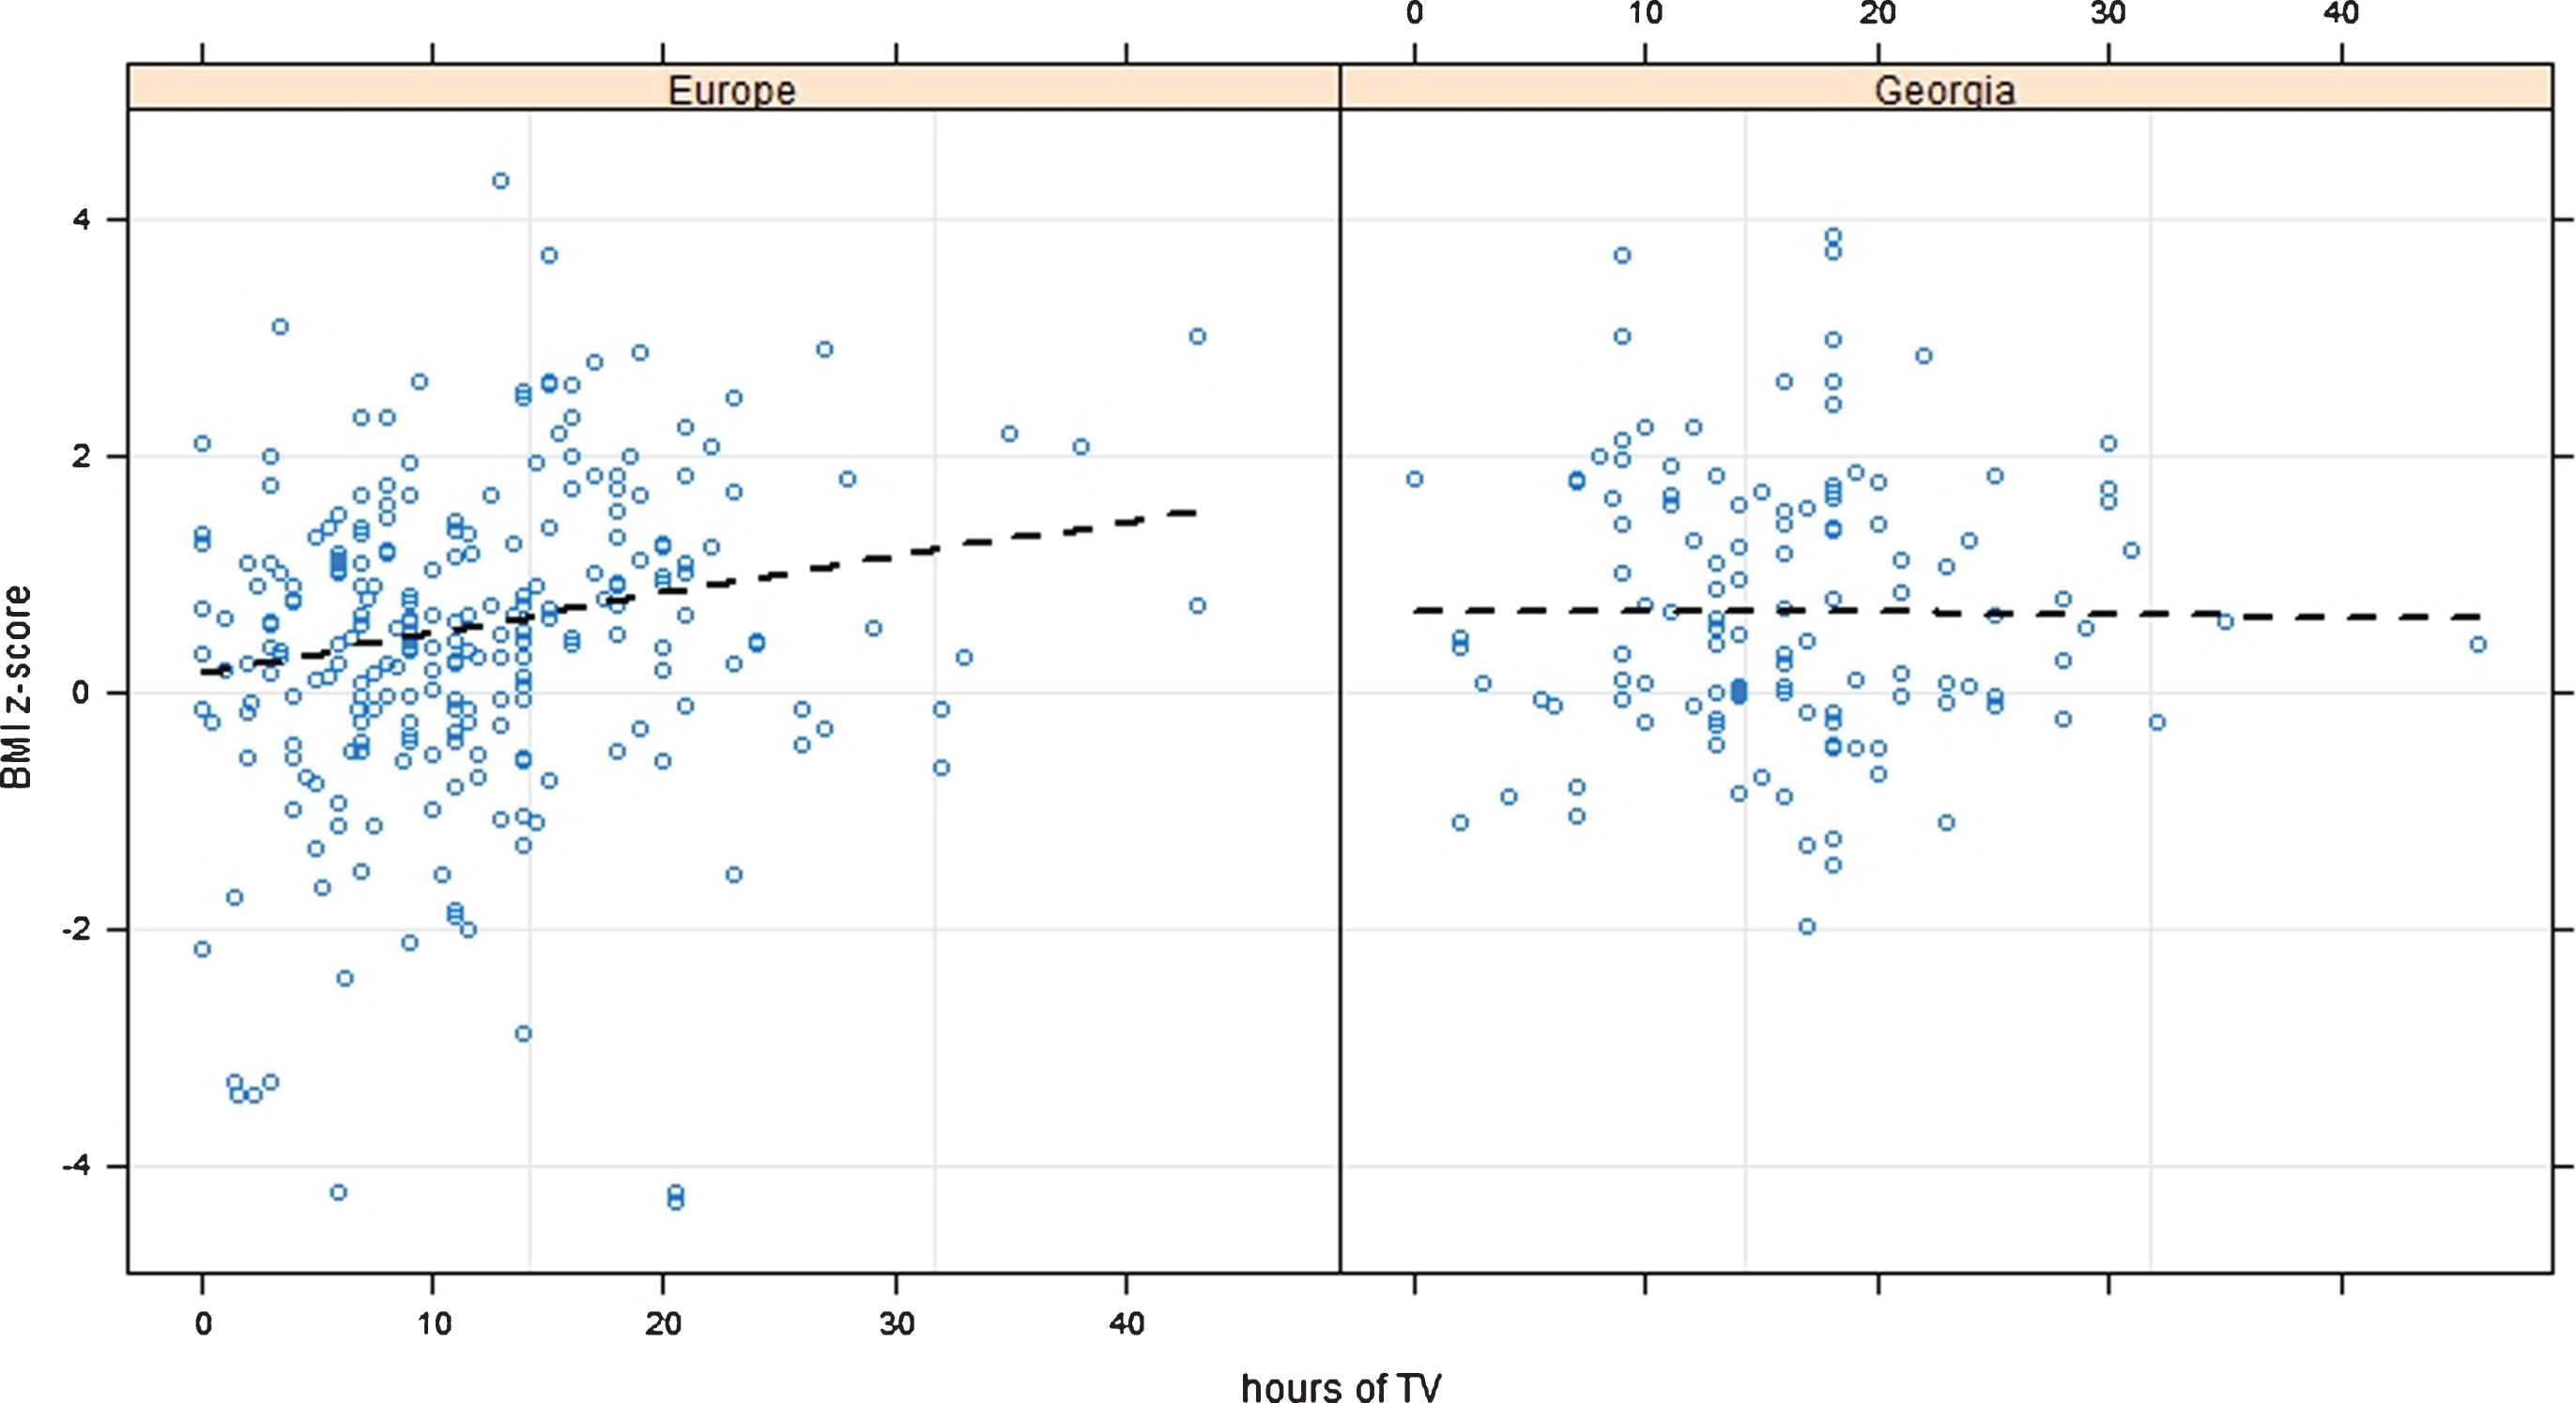 Effect of Time spent watching TV on BMI CDC z-scores among Georgia and Europe. P-value < 0.001 for Europe and 0.94 for Georgia.